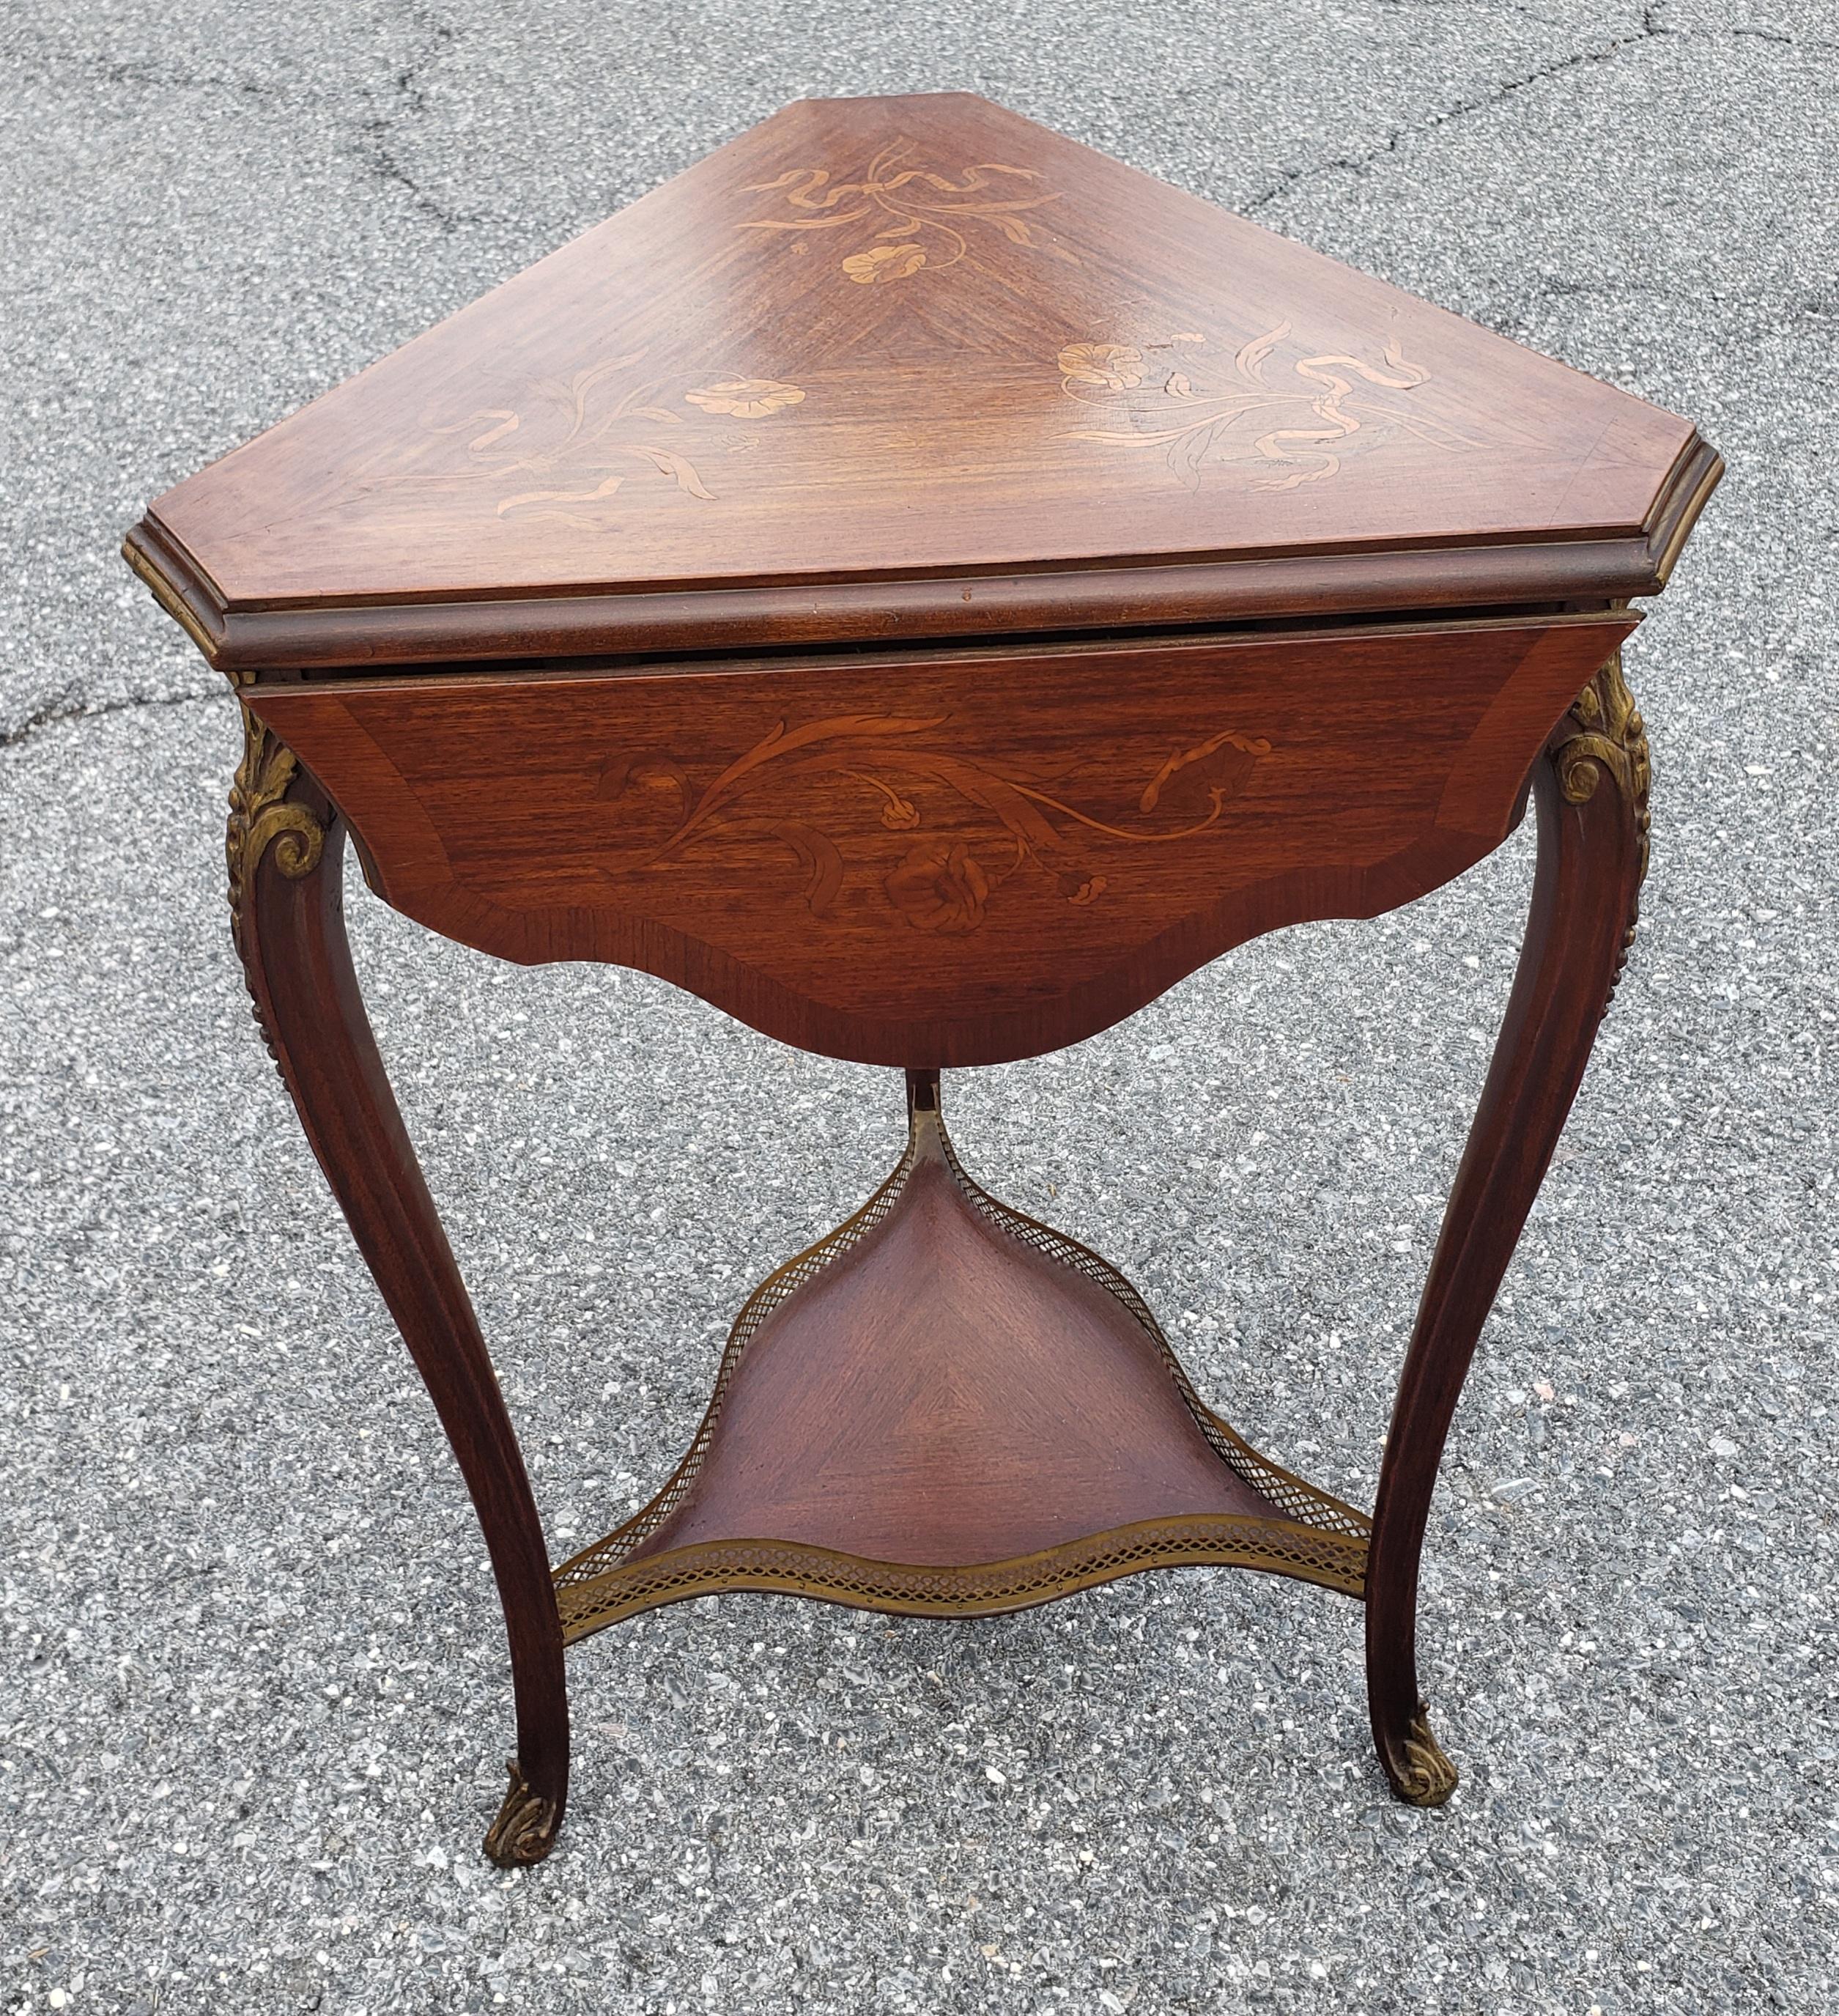 French Rococo Style Marquetry Fruitwood & Gilt Metal Mounted Triangular Drop Leaf Table For Sale